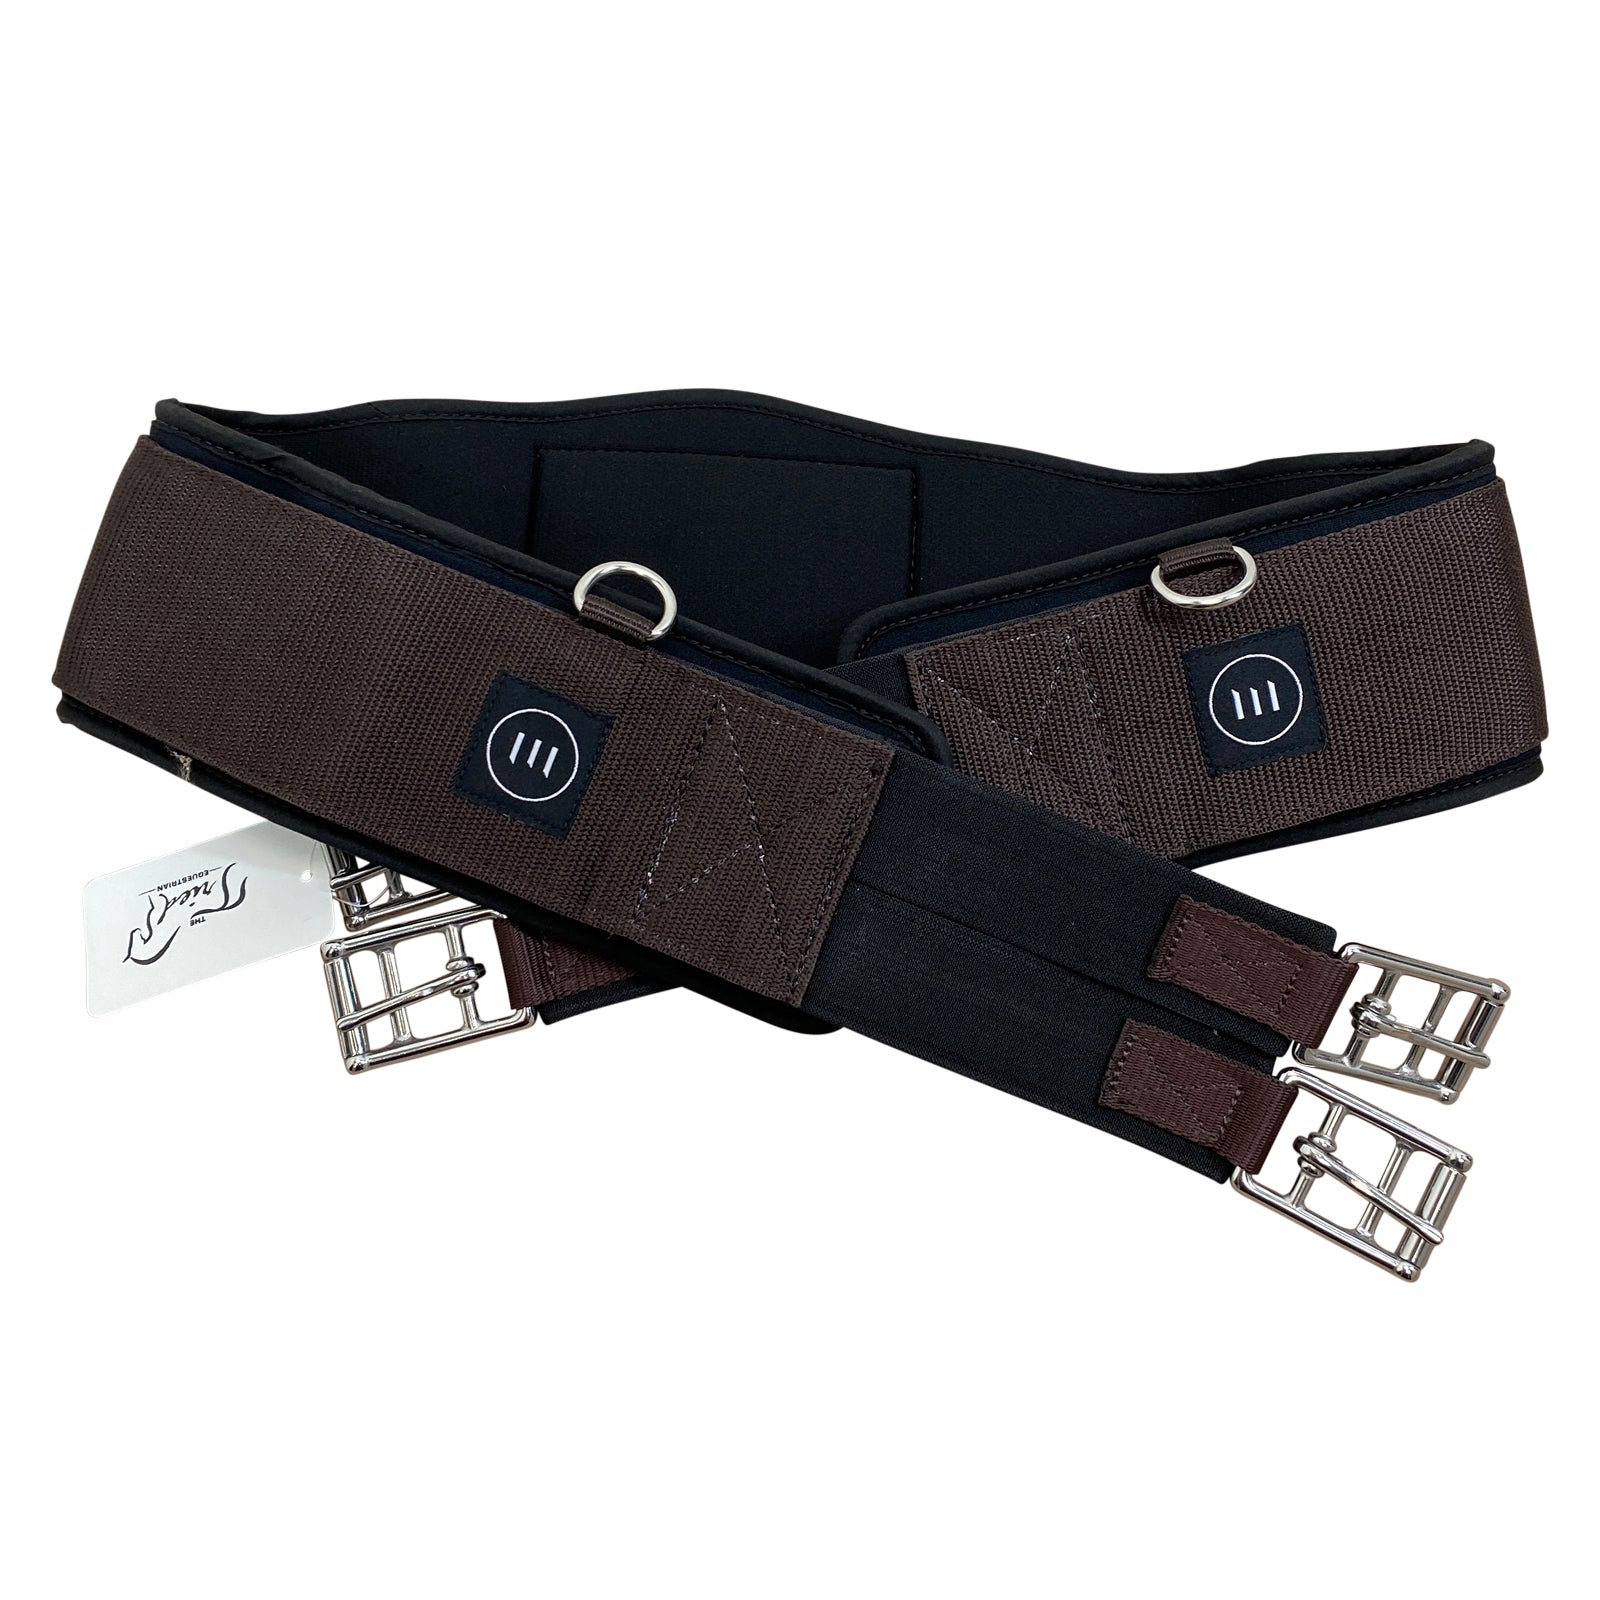 Equifit Essential Schooling Girth w/ SmartFabric Liner in Brown - 52"